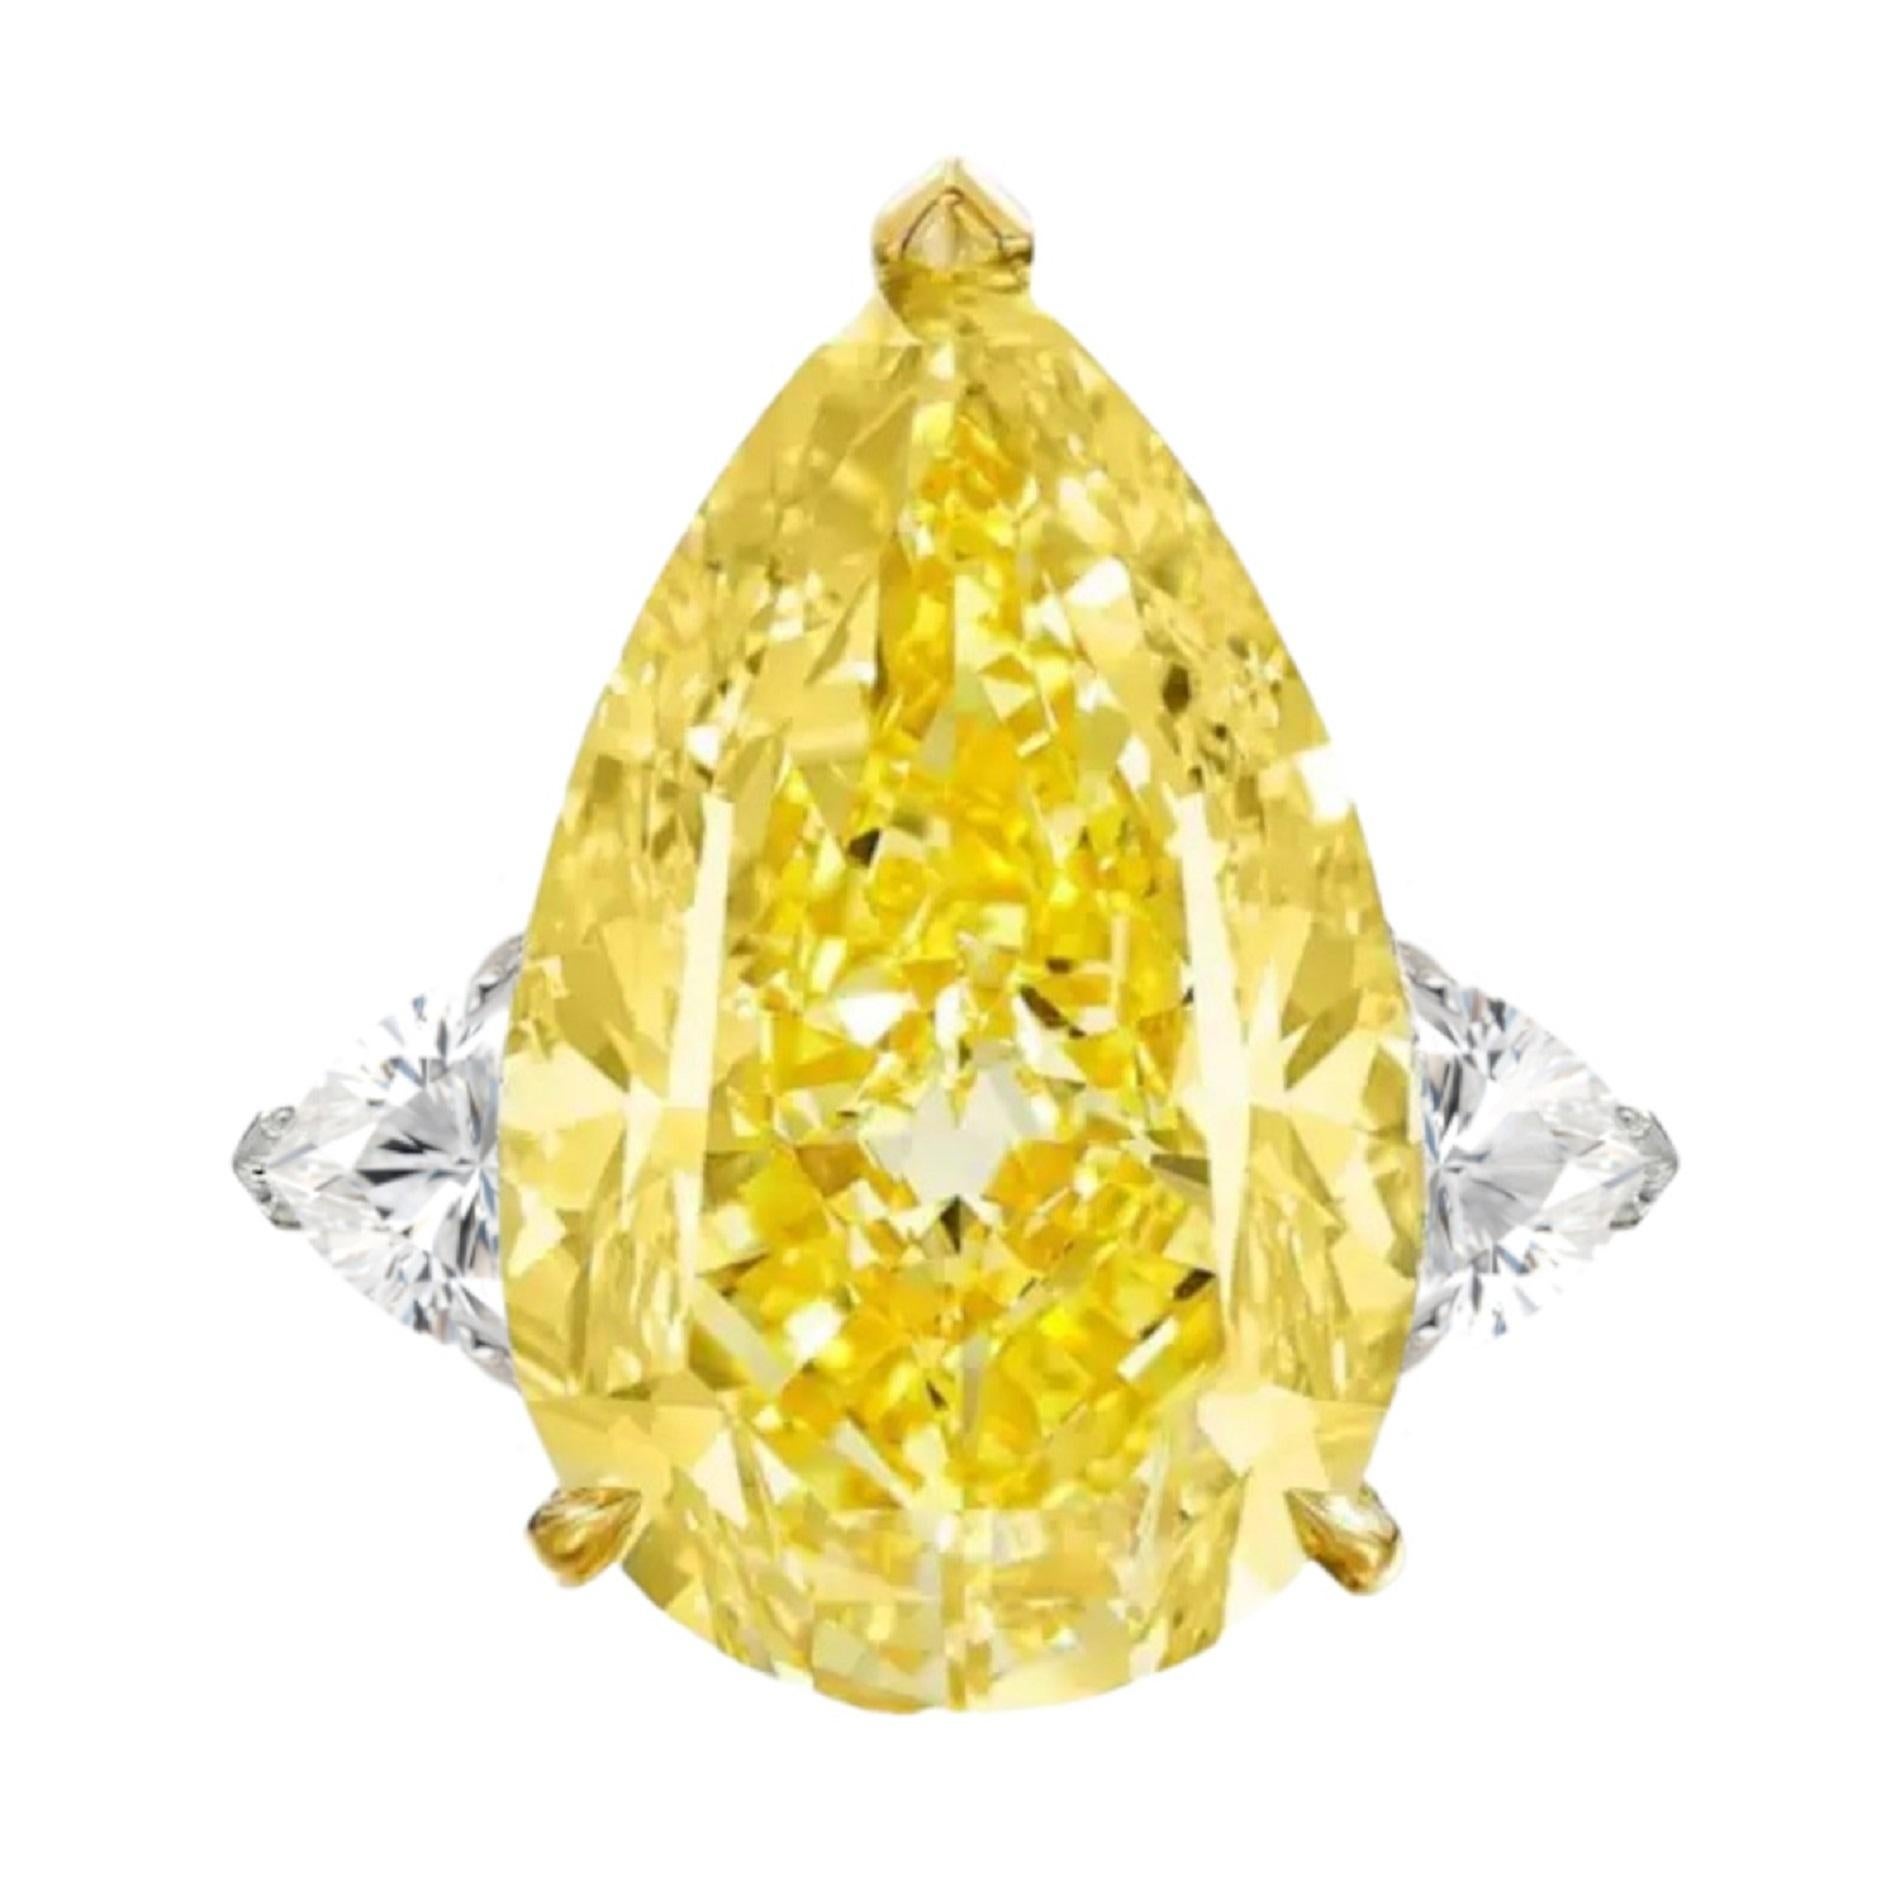 An exquisite GIA certified 9.37 carat pear cut diamond ring 

set with two beautiful trillion cut diamonds 

and set in solid platinum and 18 yellow gold

the ring is resizable

